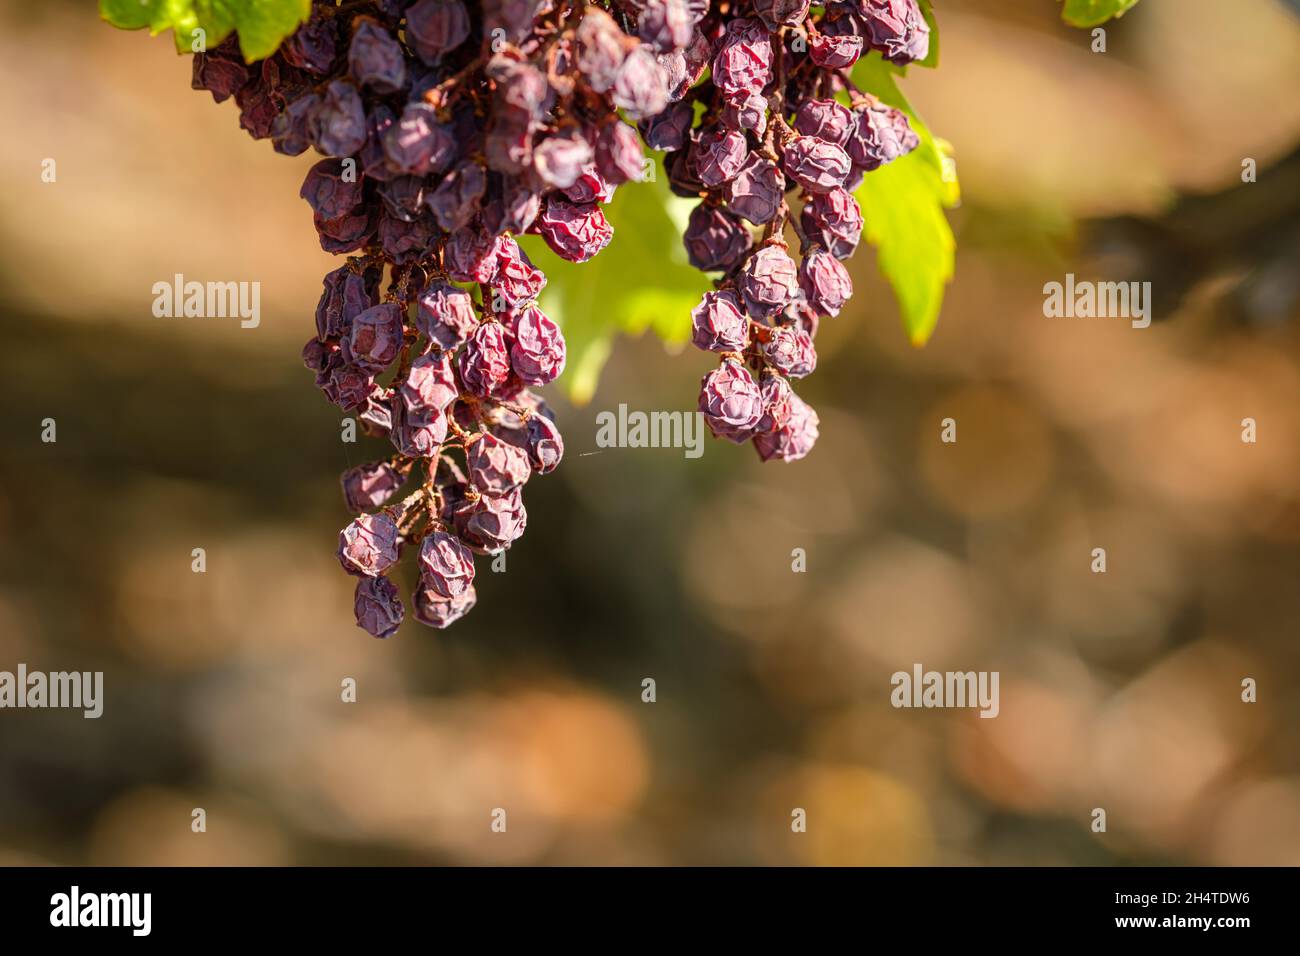 Trollinger grapes in autumn in the blurred background with bokeh lights Stock Photo